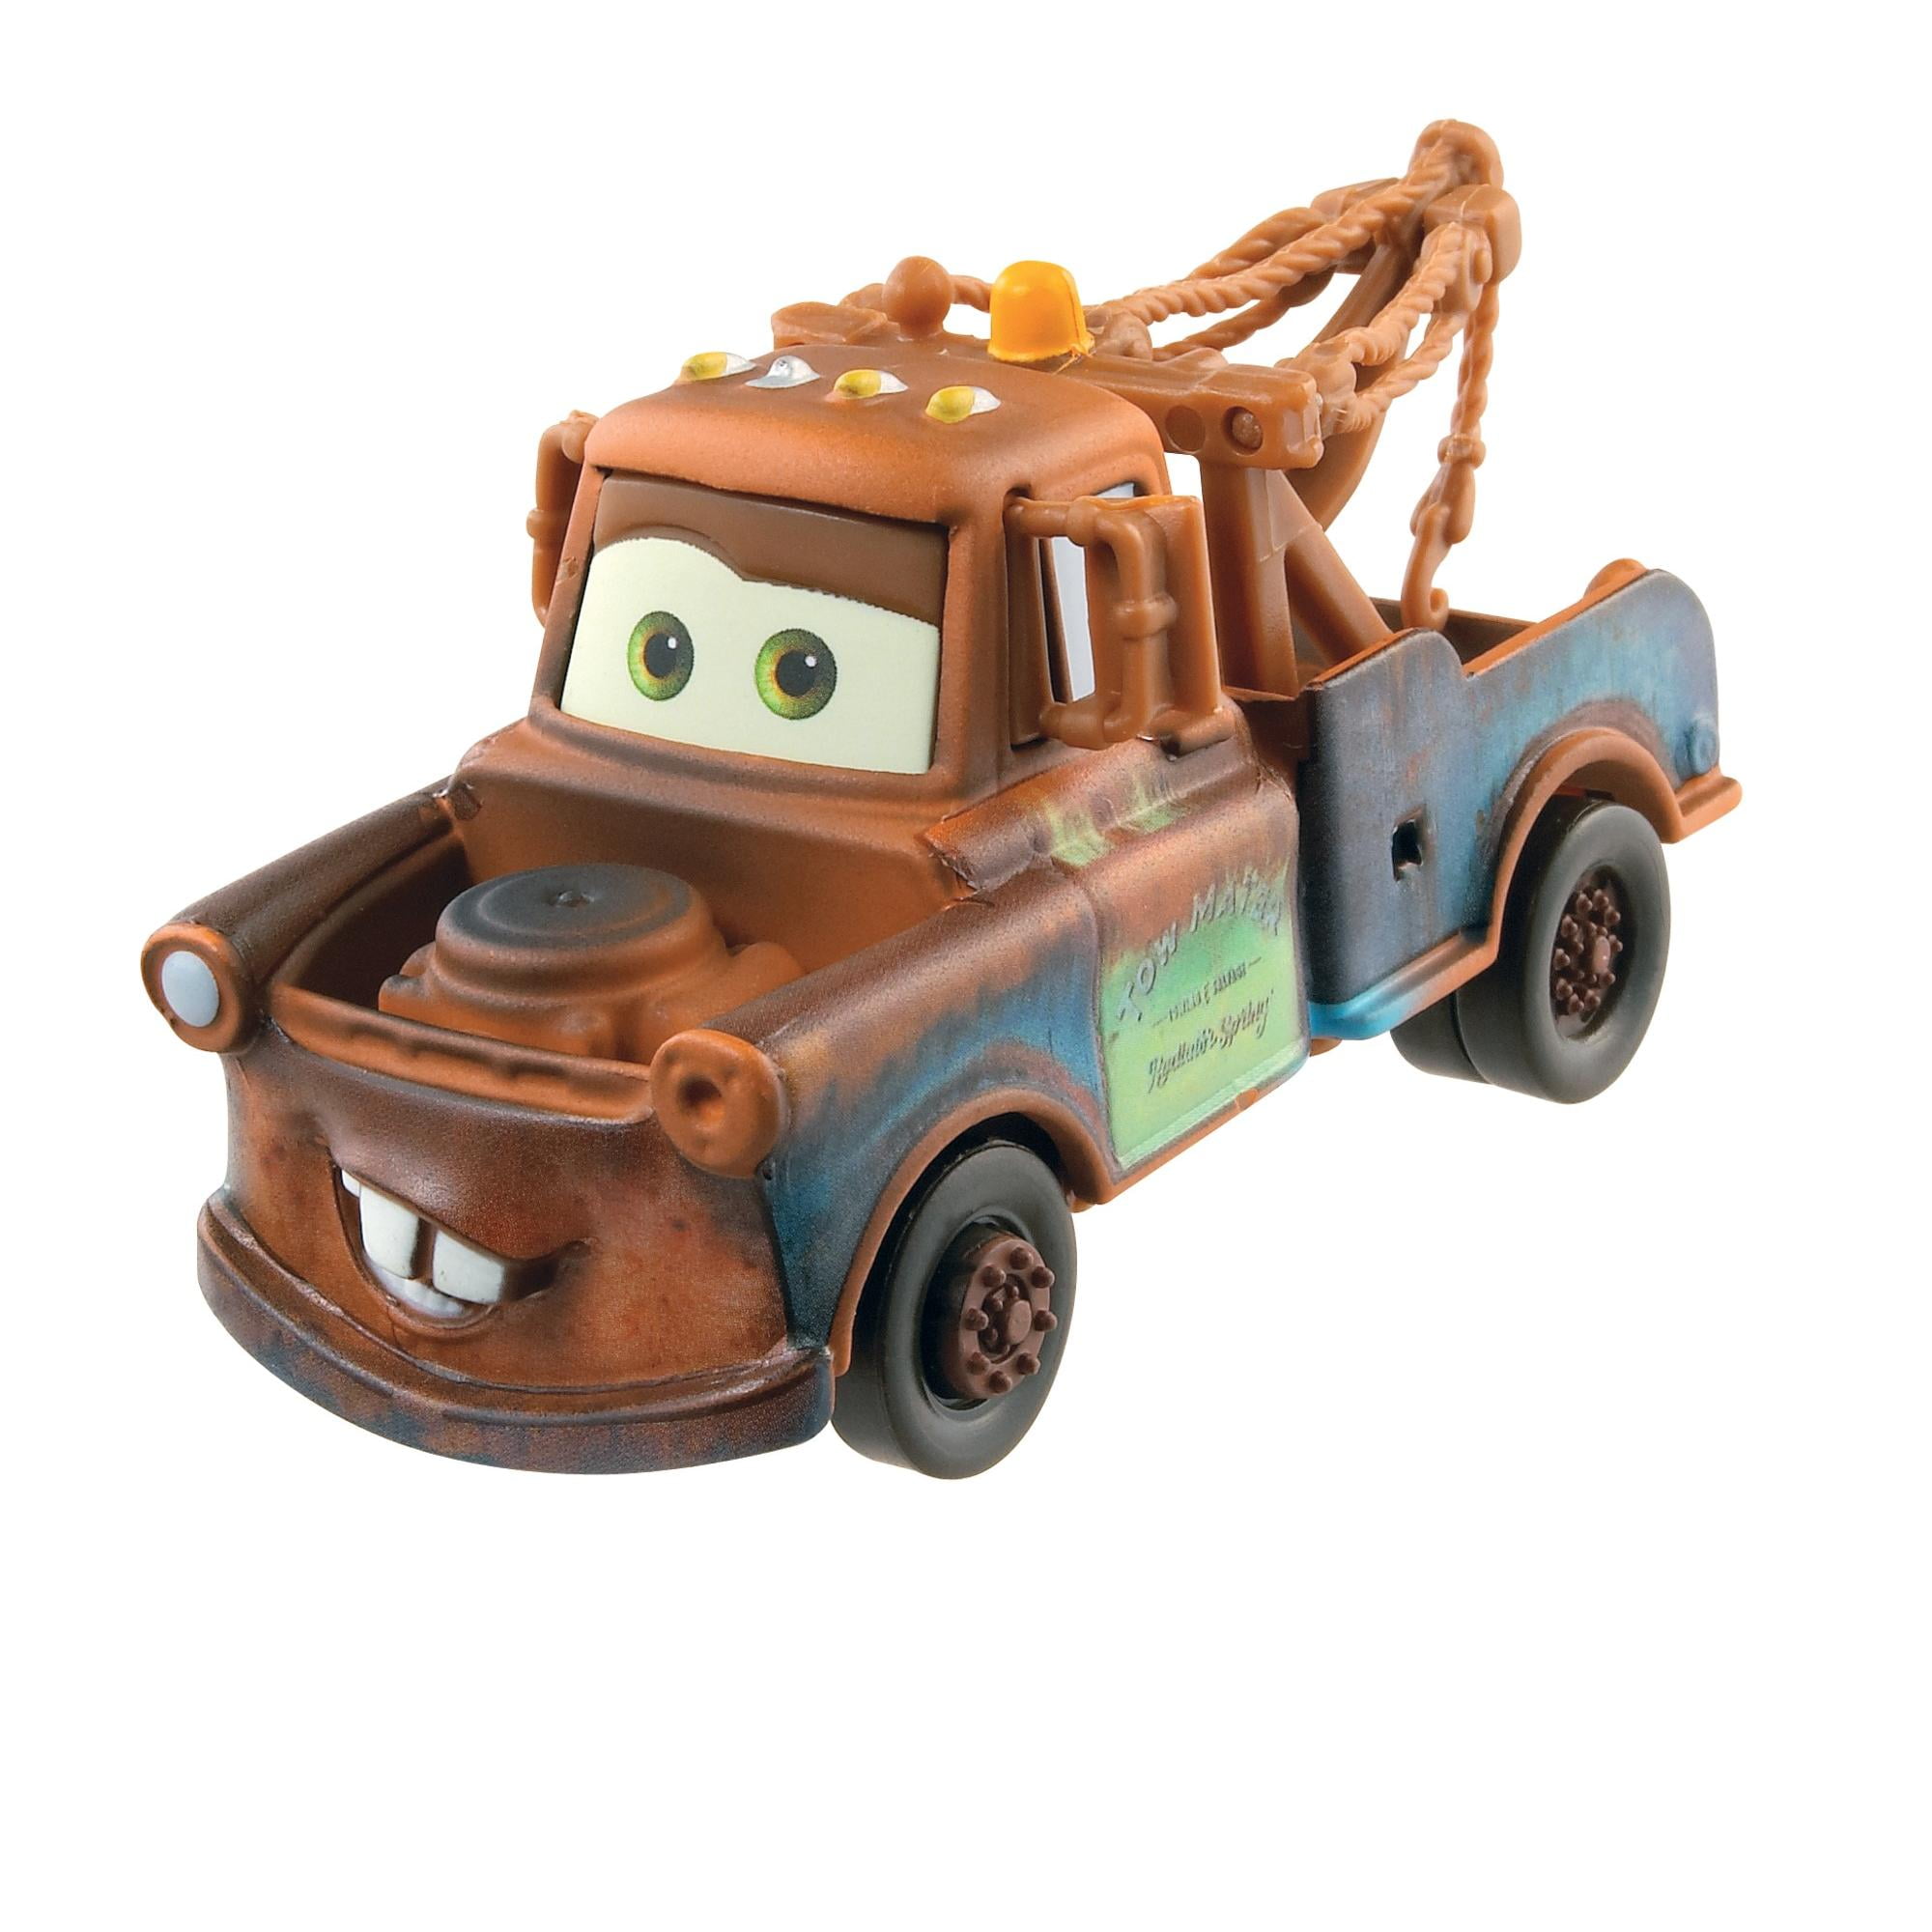 Tow MATER, The star of the movie Cars was at the show!, Chris Breeze